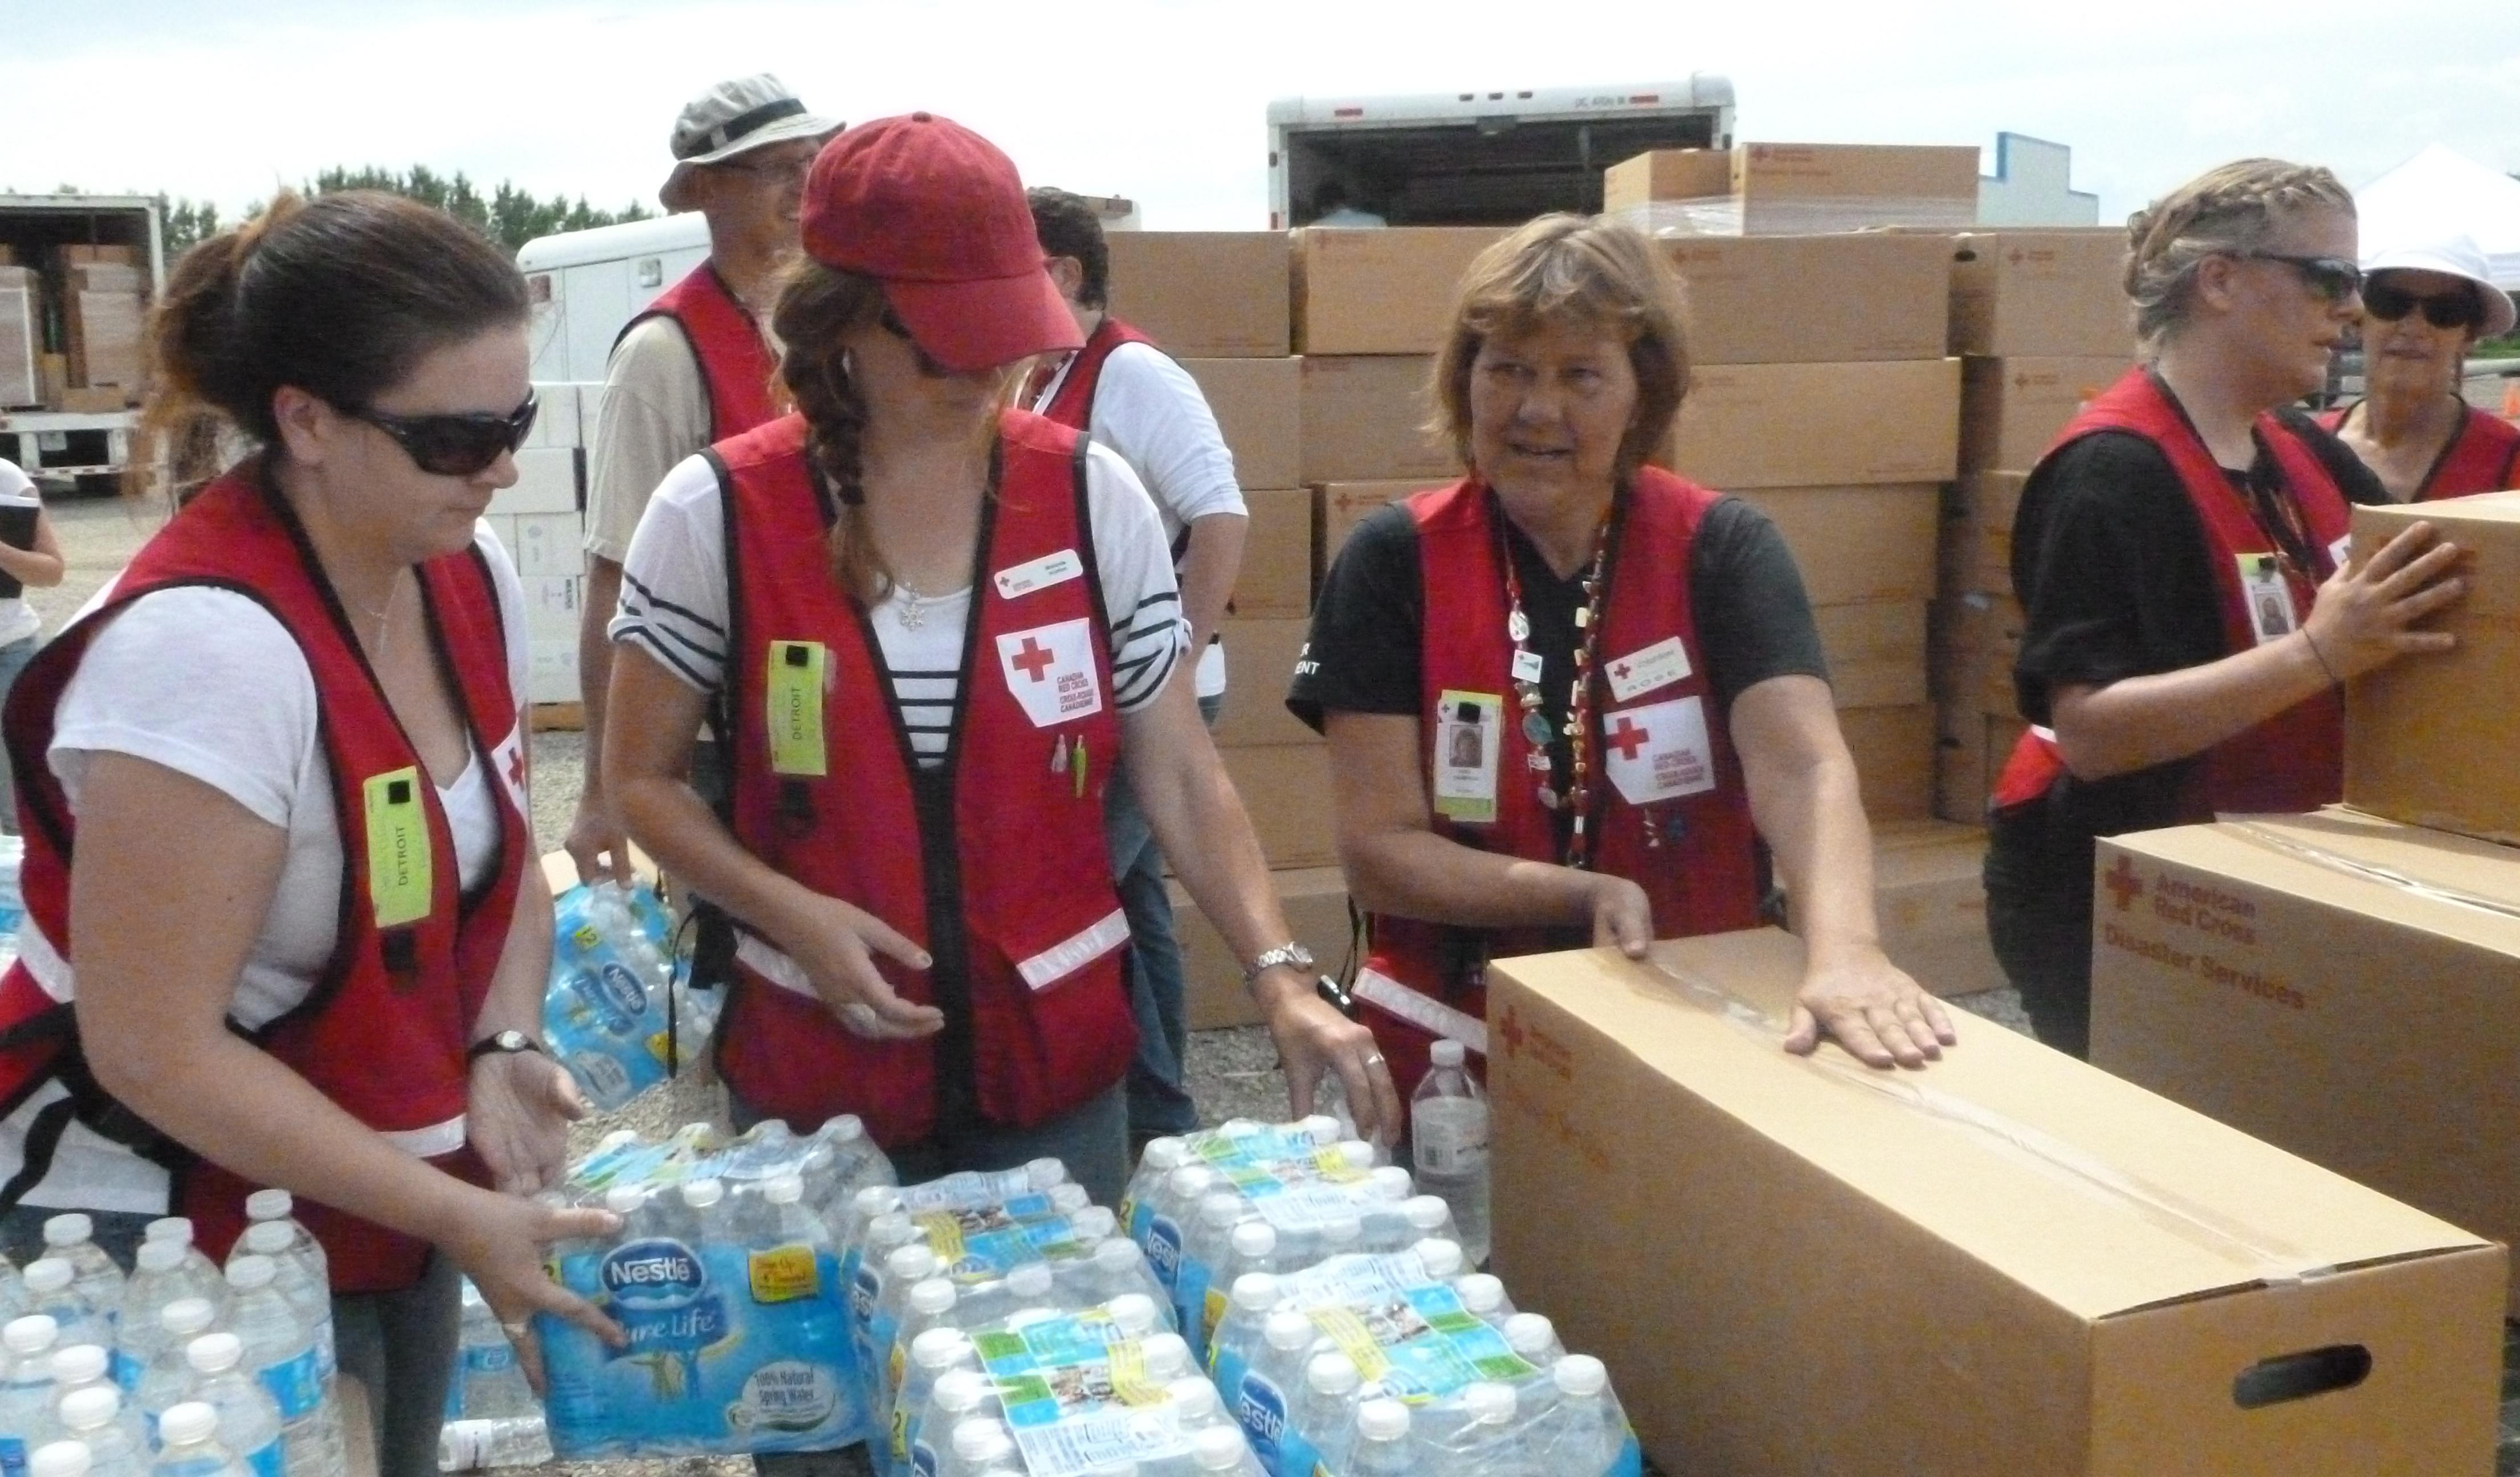 Canadian Red Cross volunteers distributing clean-up kits and water